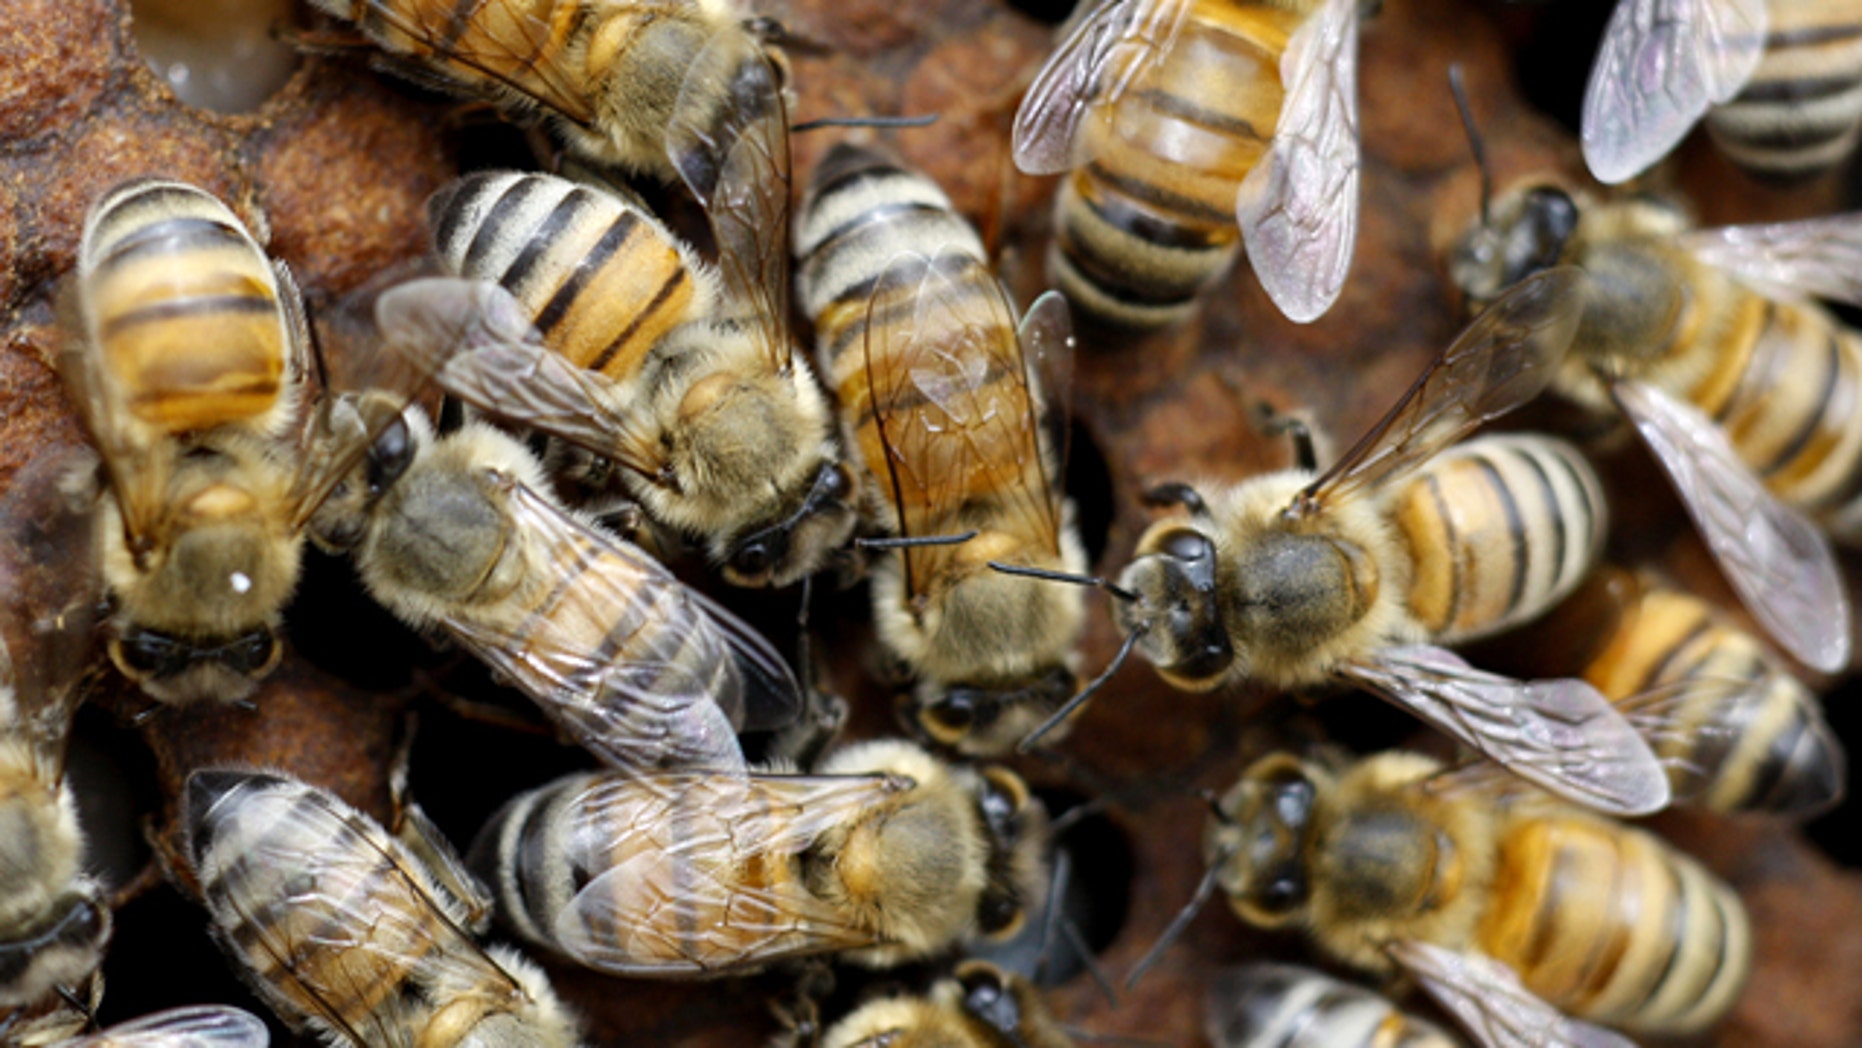 Man Stung More Than 1200 Times In Bee Attack Fox News